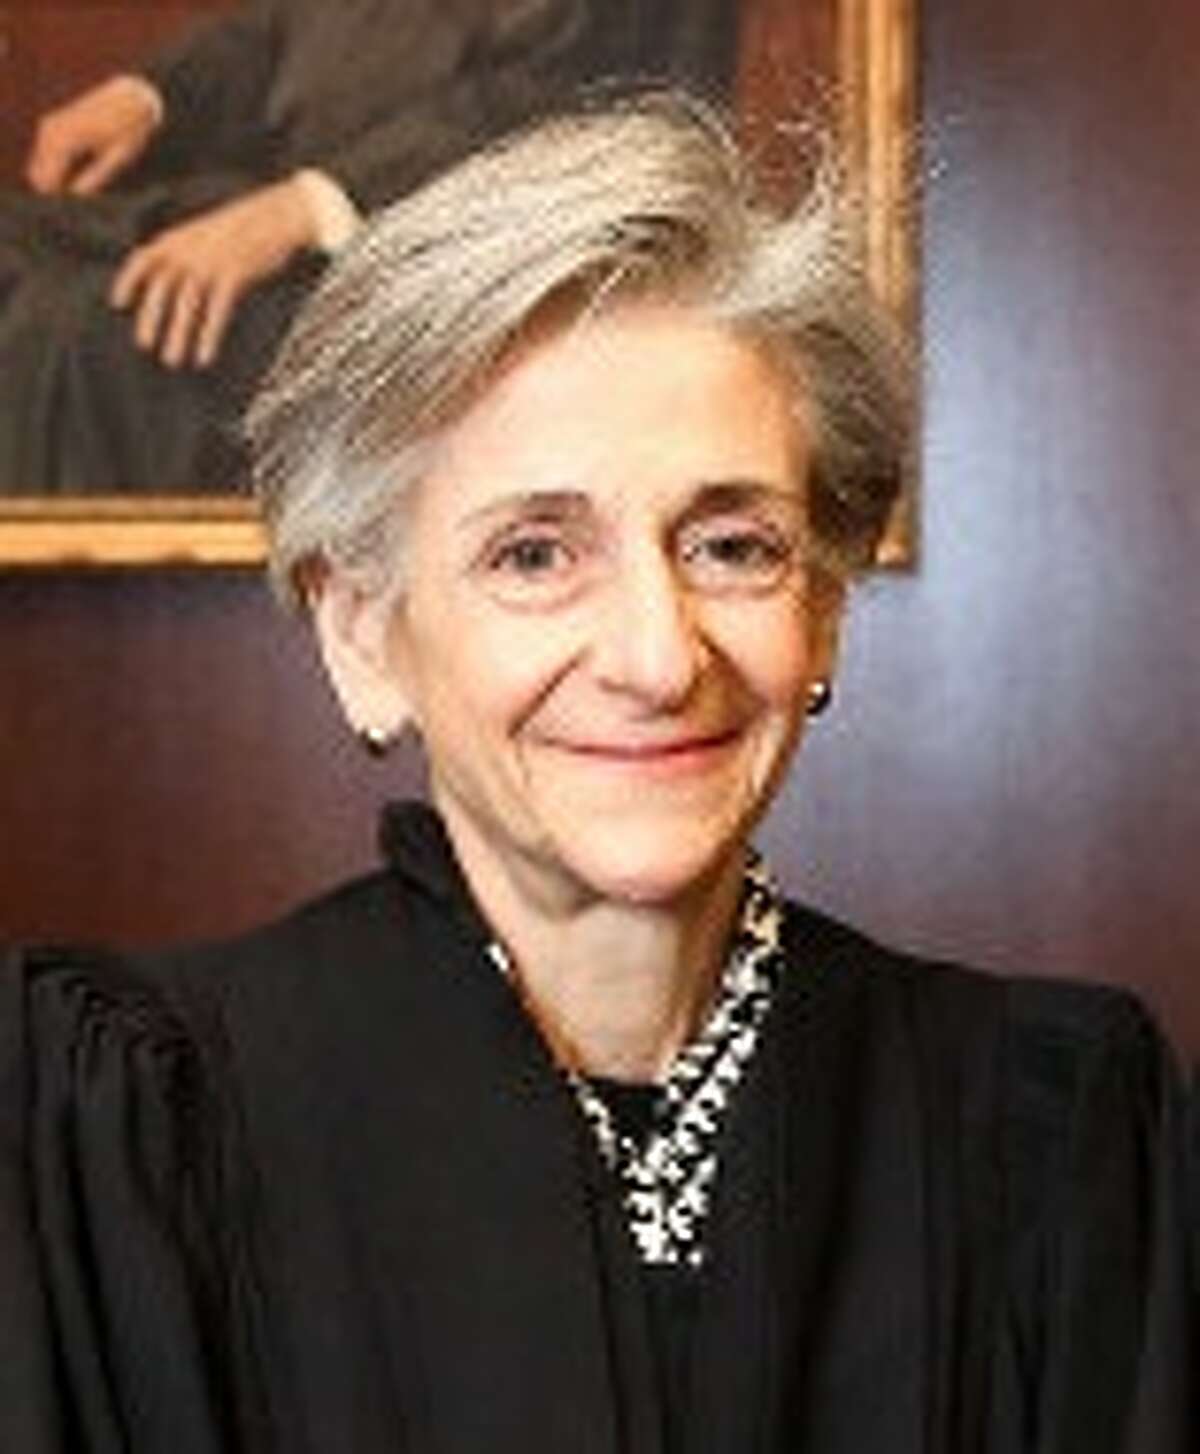 U.S. District Court Judge Lee H. Rosenthal found that ethnicity was a proxy for party in Pasadena elections.